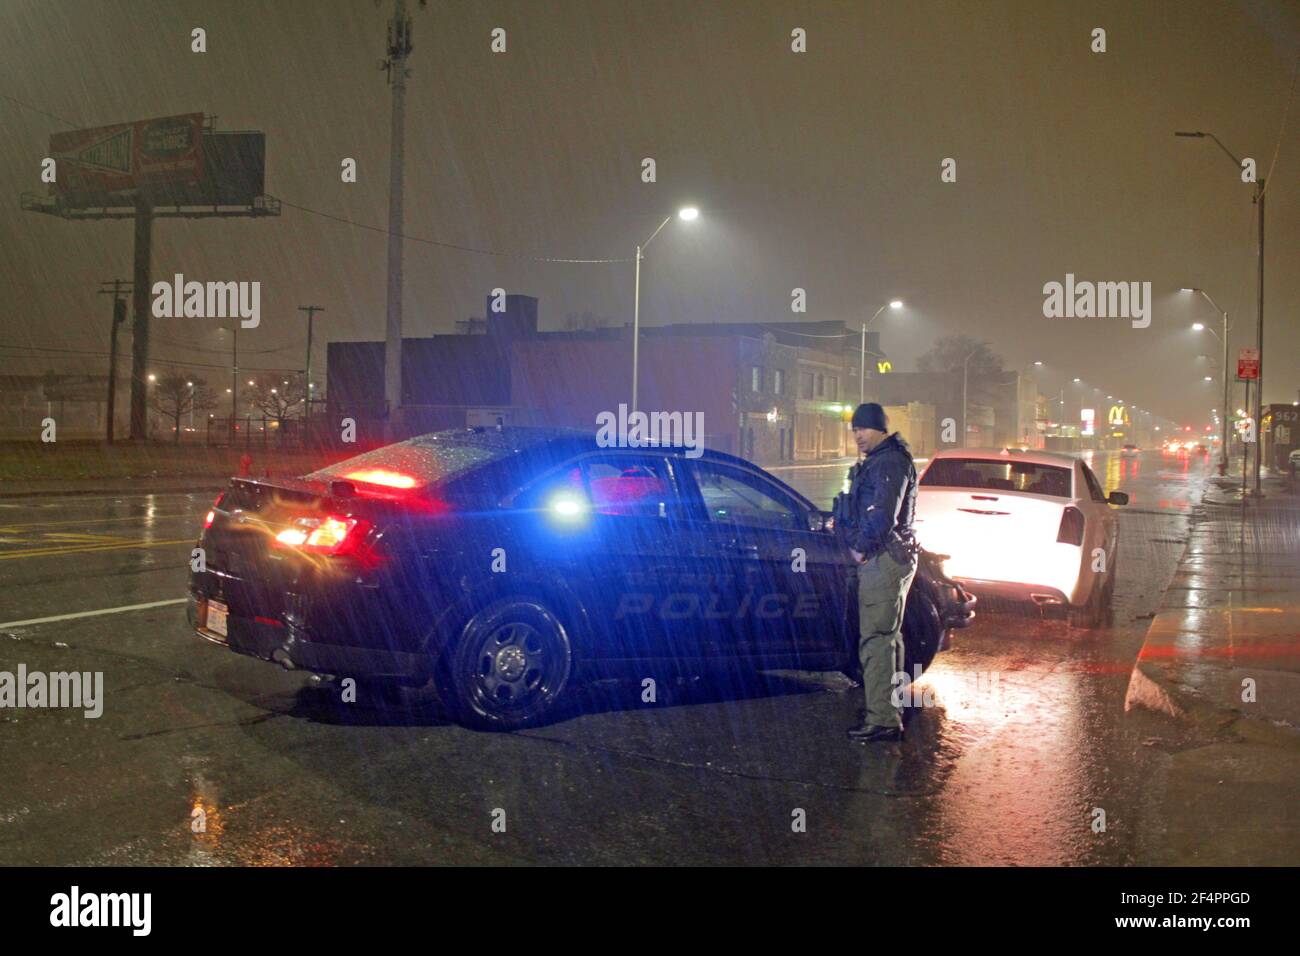 Police stop a car on a rainy night in Detroit, Michigan, USA Stock Photo